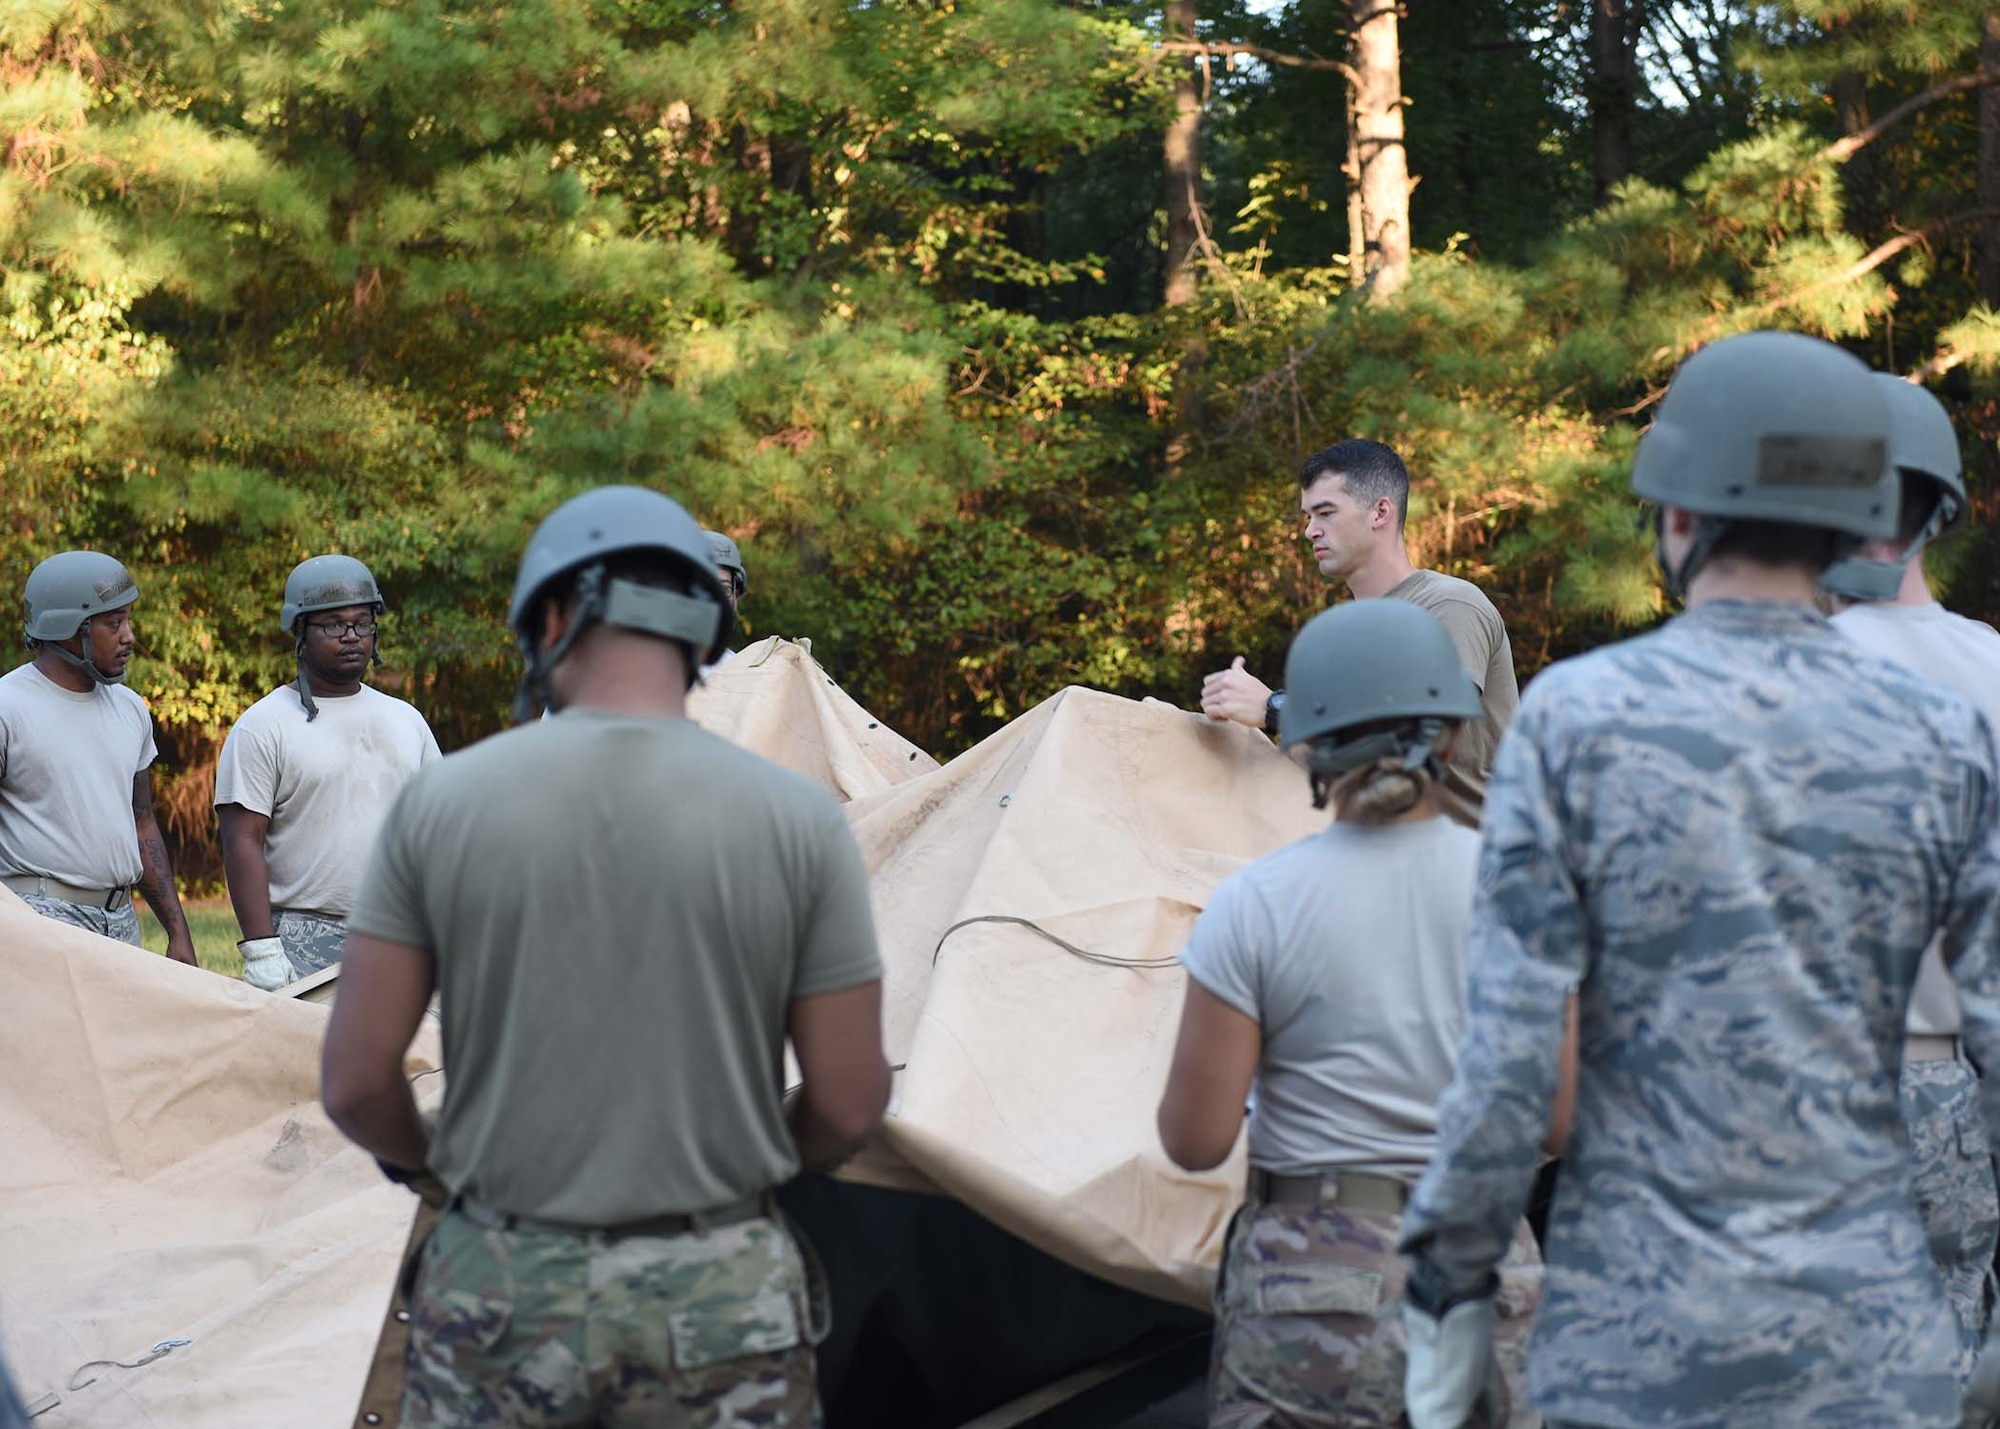 Multiple Airmen spread a plastic cover over a tent.